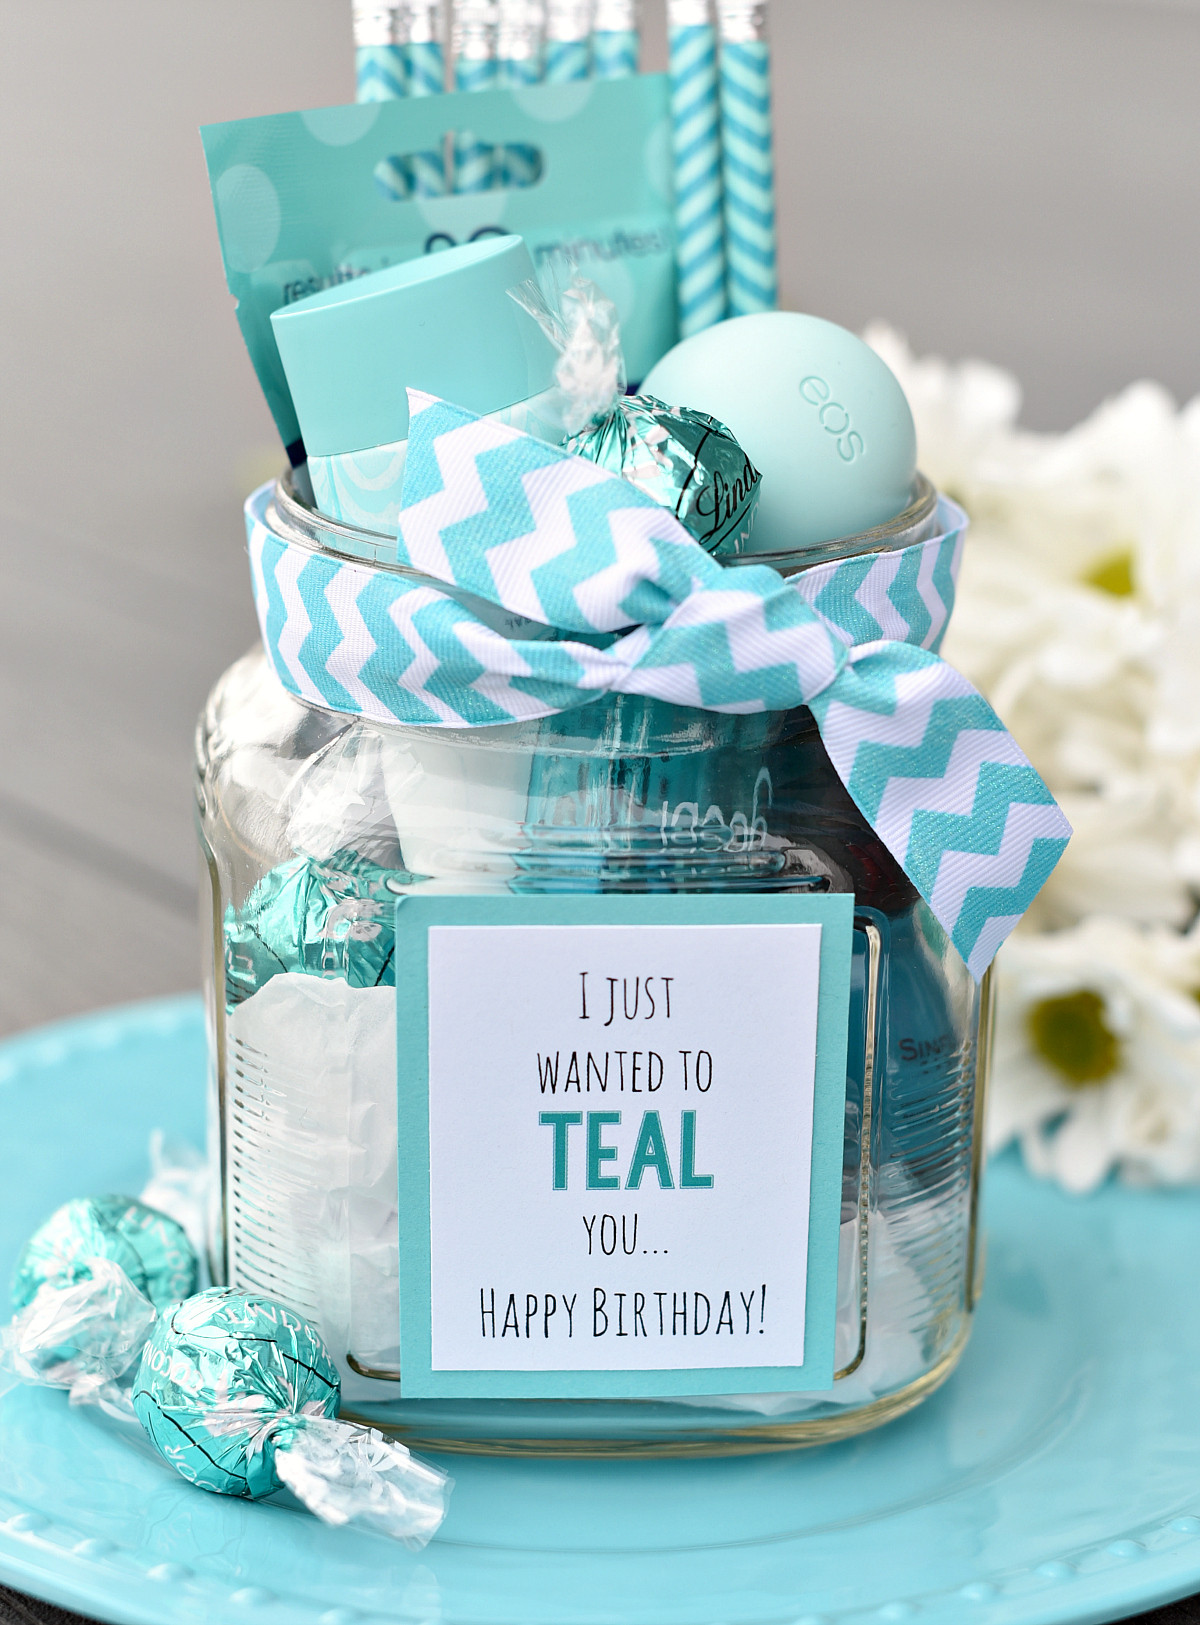 Best Gift Ideas For Best Friend
 Teal Birthday Gift Idea for Friends – Fun Squared